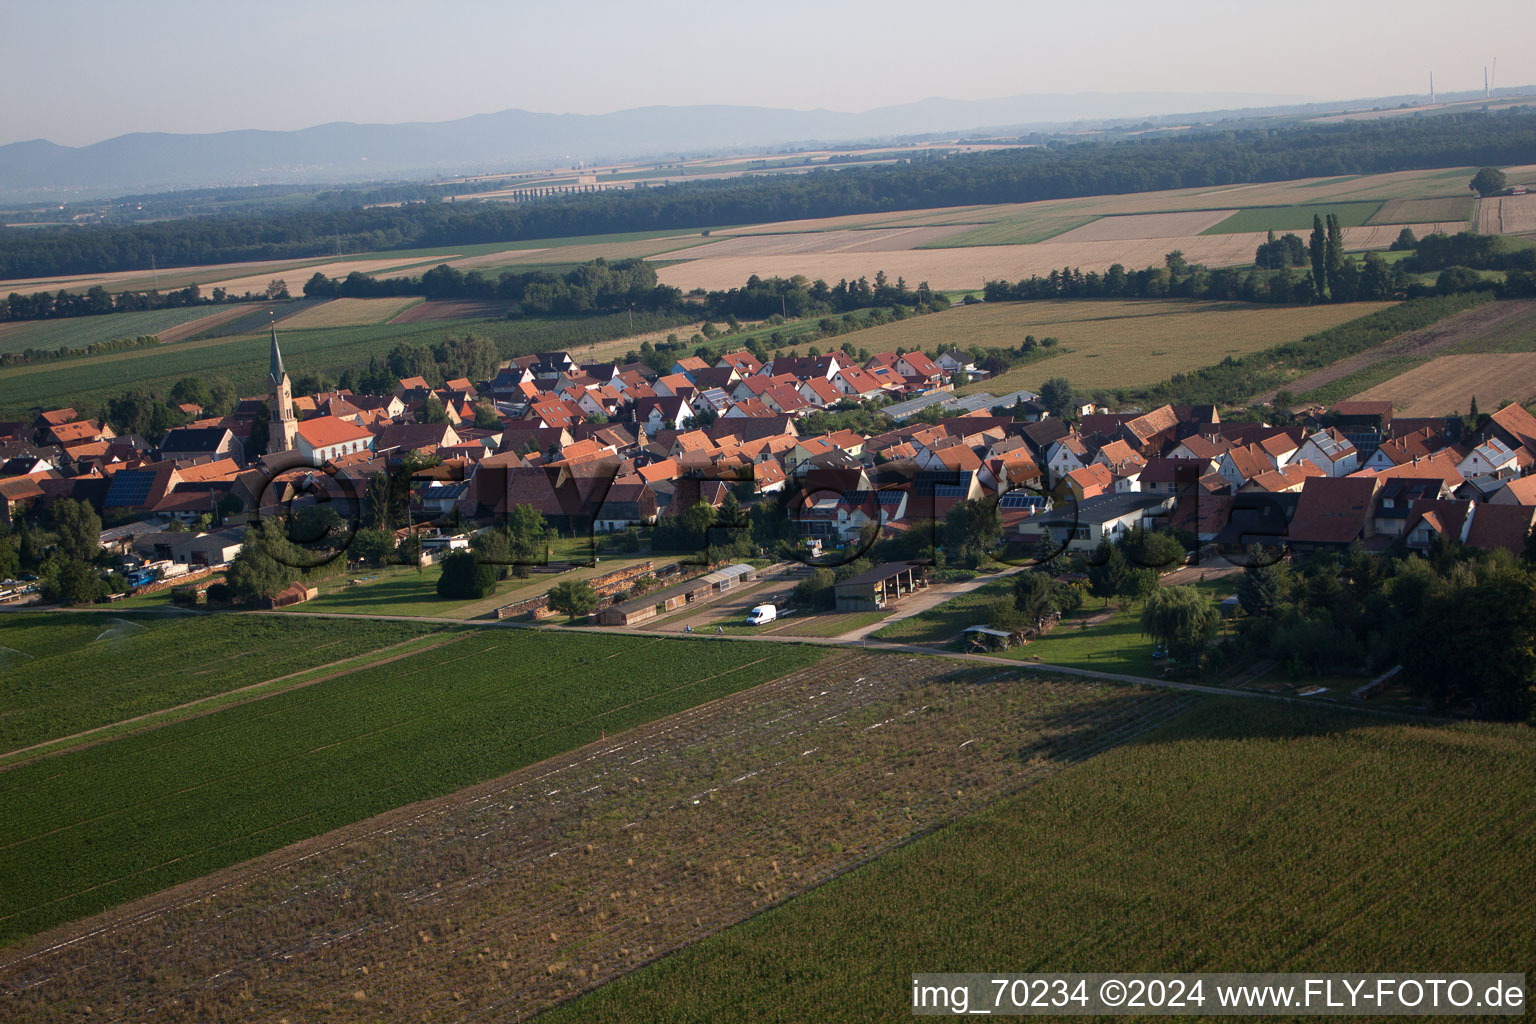 Erlenbach bei Kandel in the state Rhineland-Palatinate, Germany seen from a drone